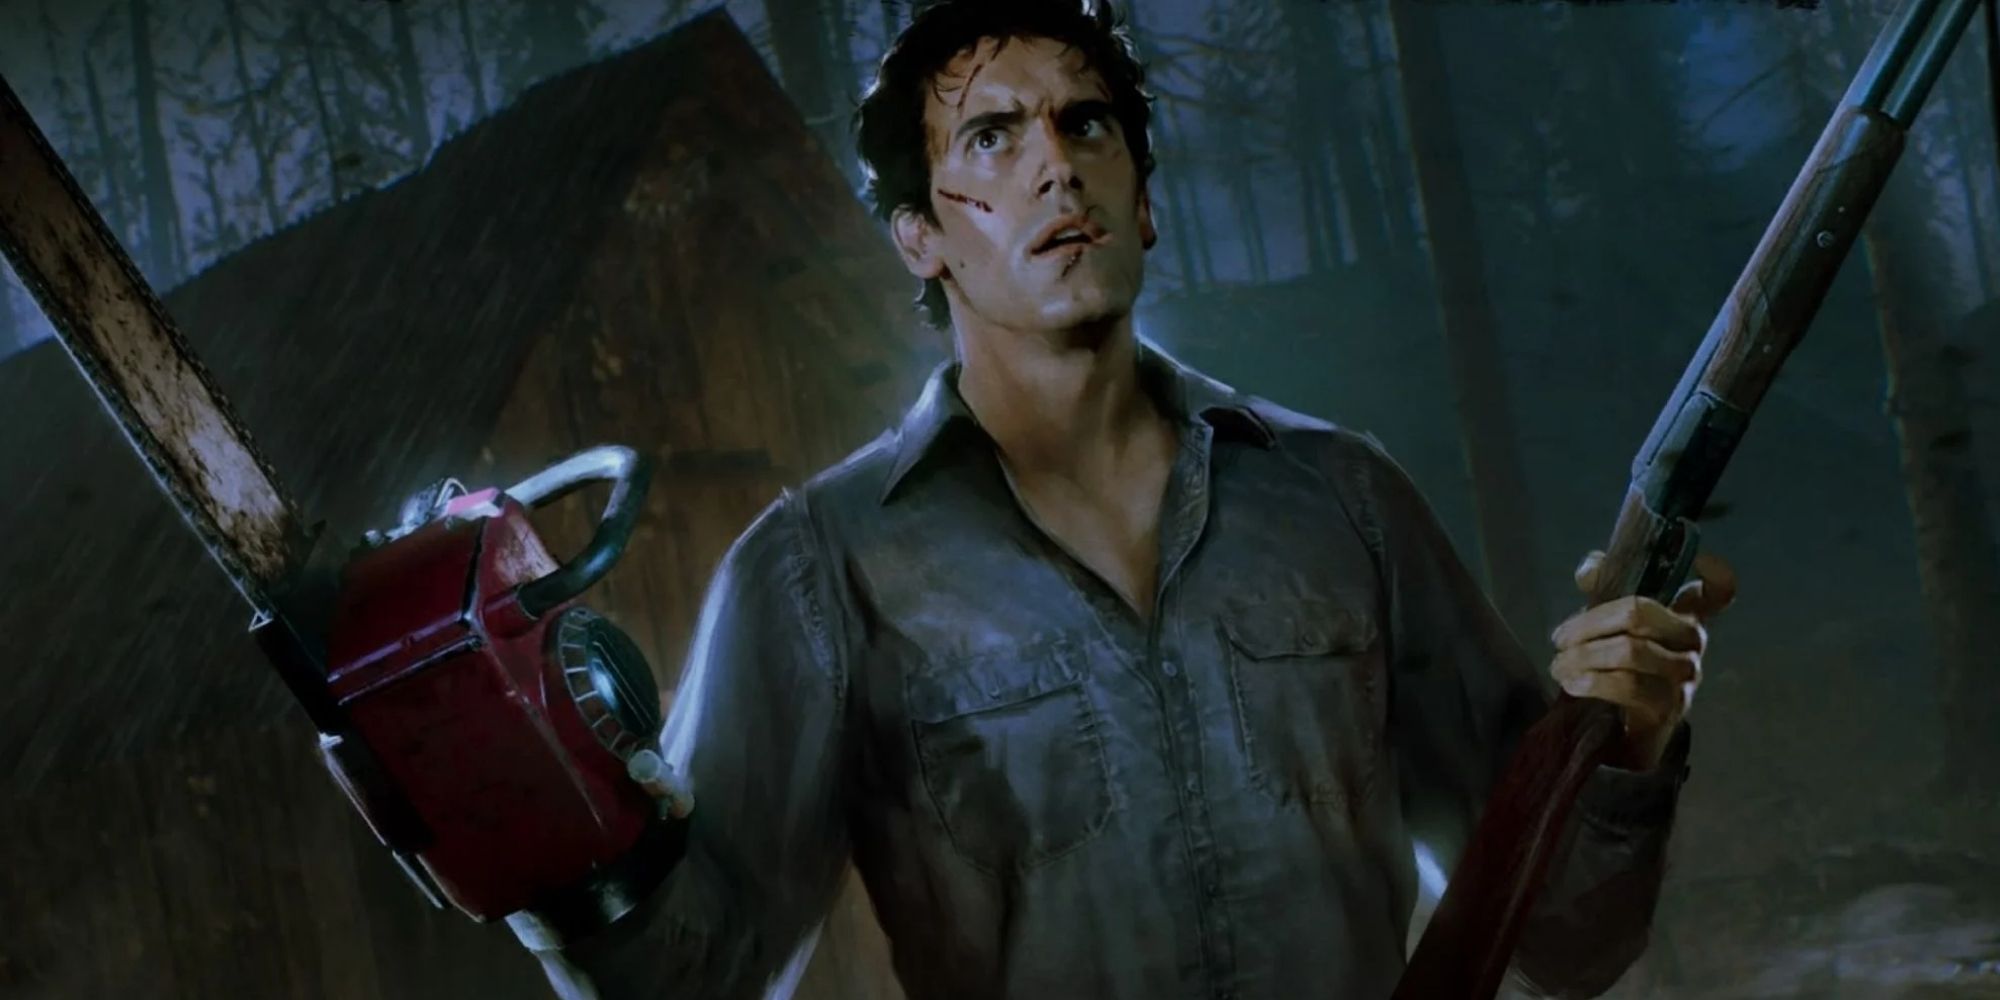 Evil Dead: The Game Review - Not Very Groovy - Game Informer